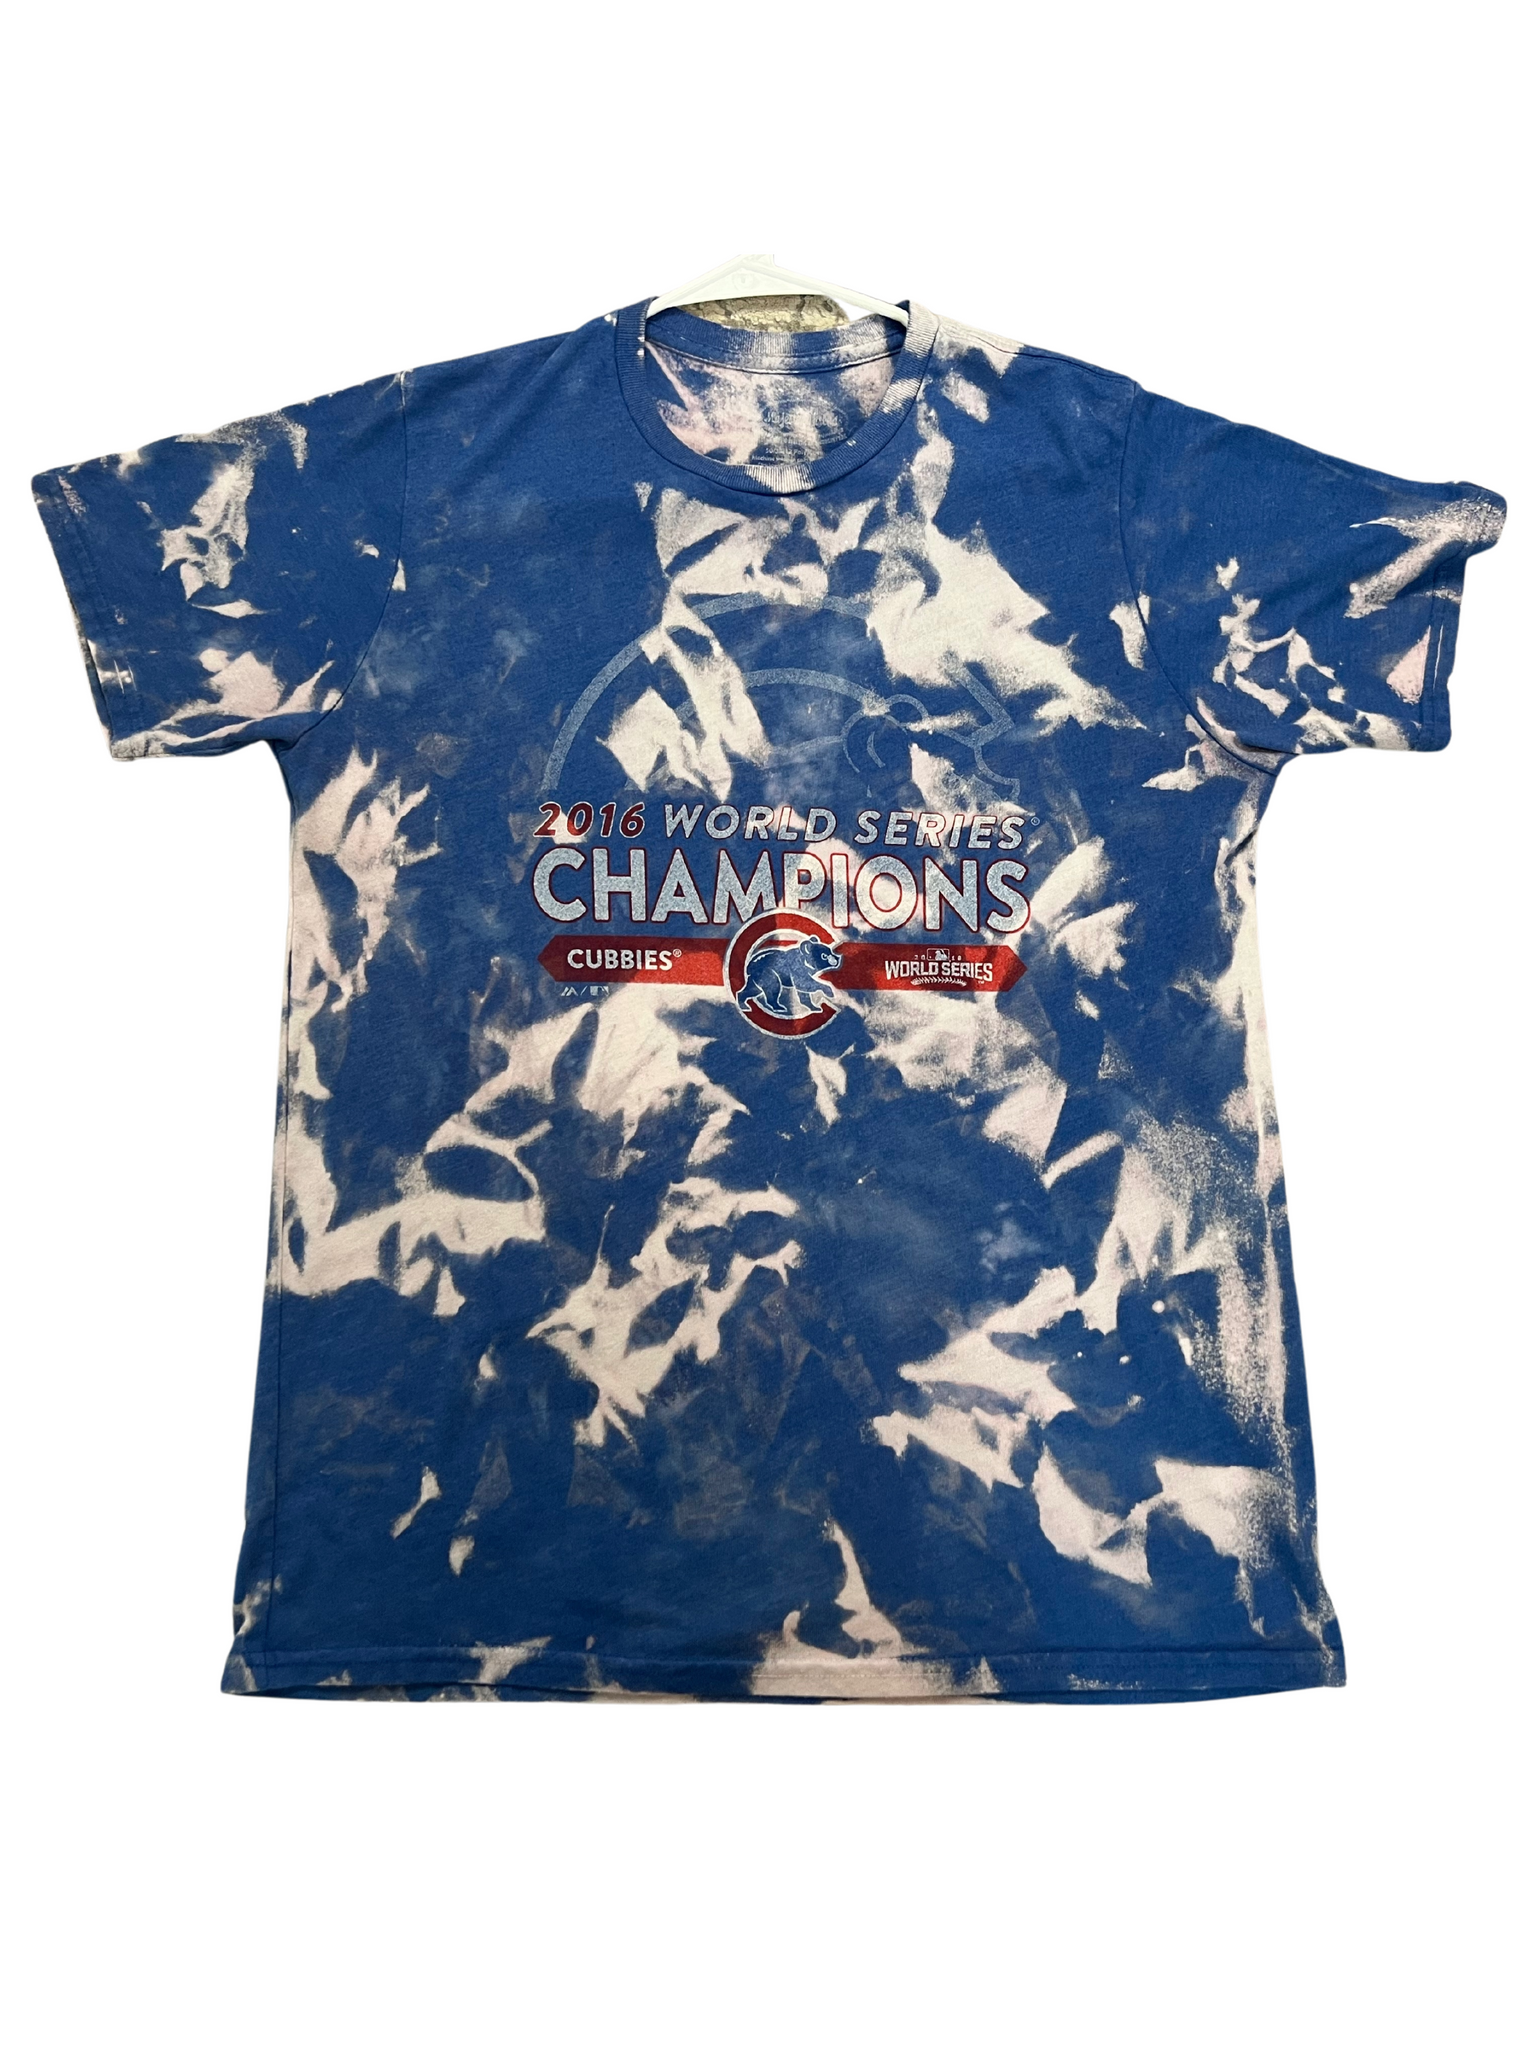 Chicago Cubs Champs 2016 World Series Champions MLB Blue Jersey Shirt Size  XL